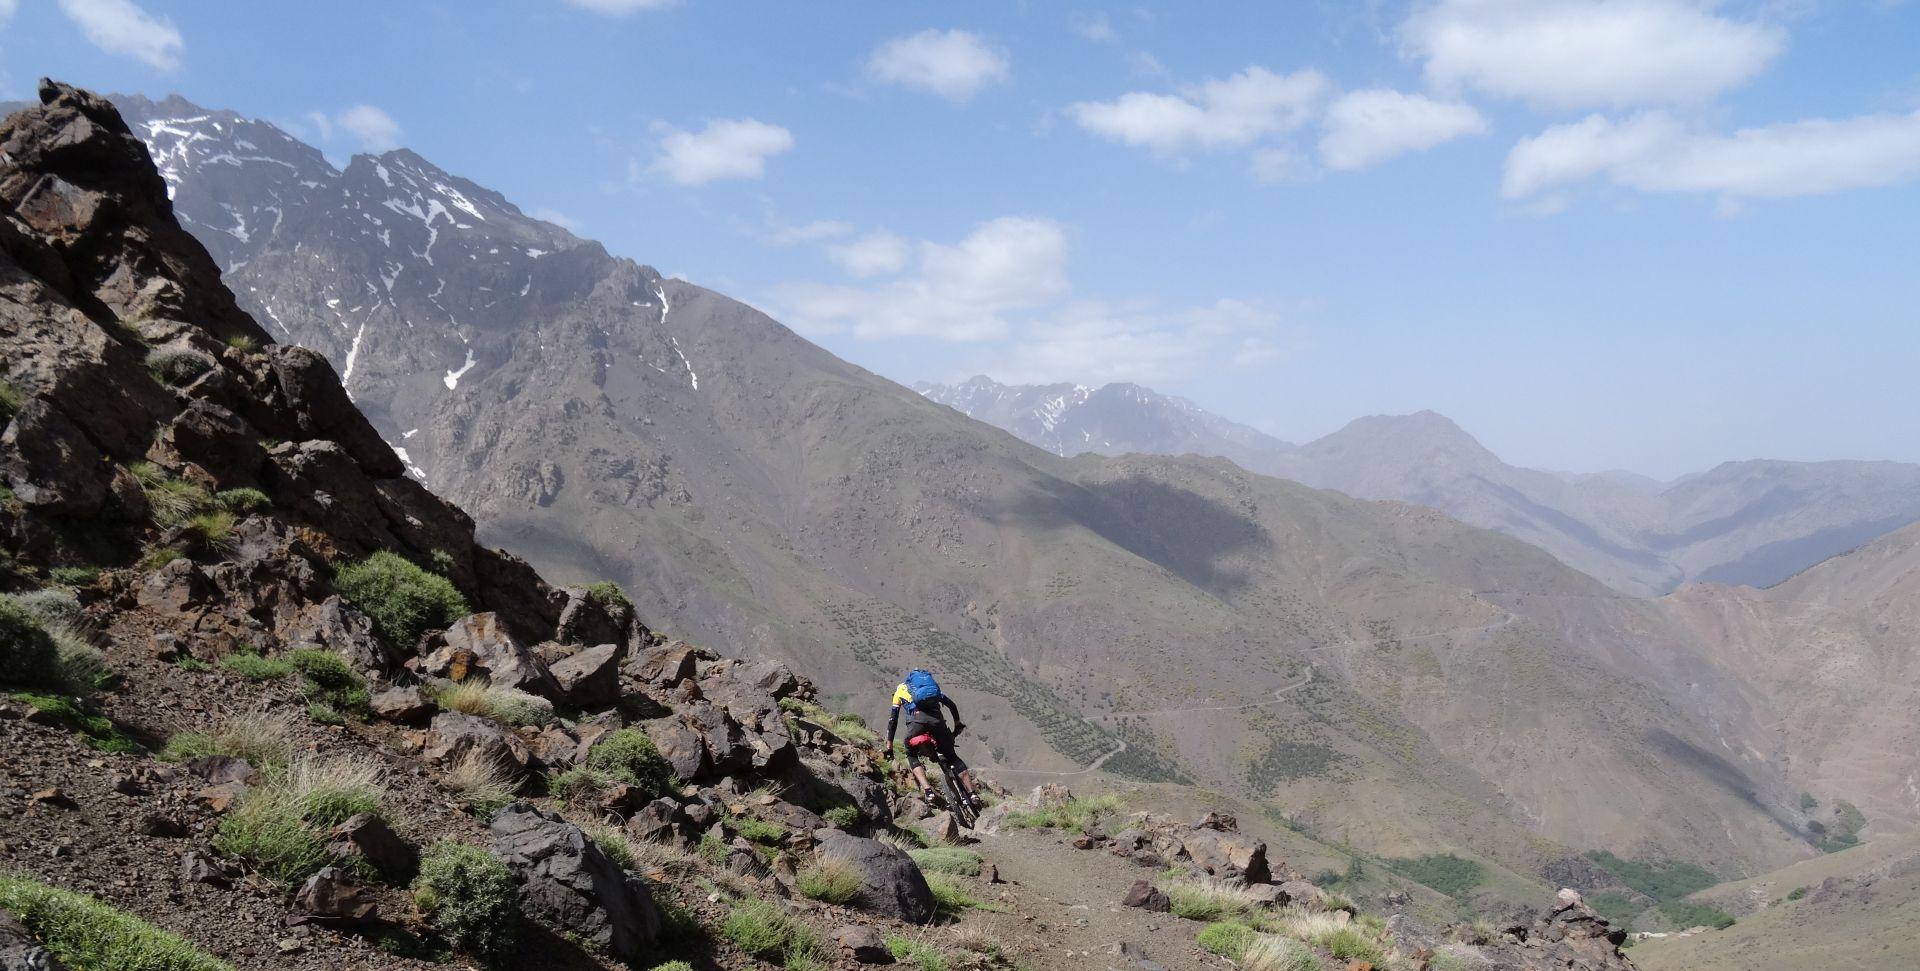 Day 8 - Awww, don`t take a photo when I`m briefly feet-down trying to thread through rocks so I don`t snap off my rear derailleur again! Descent from Tizi-n-Eddi to the village of Tizi-n-Tacheddirt. Jbel Aksoual (12,828 ft) is on the far left, on the horizon © Steve Woodward